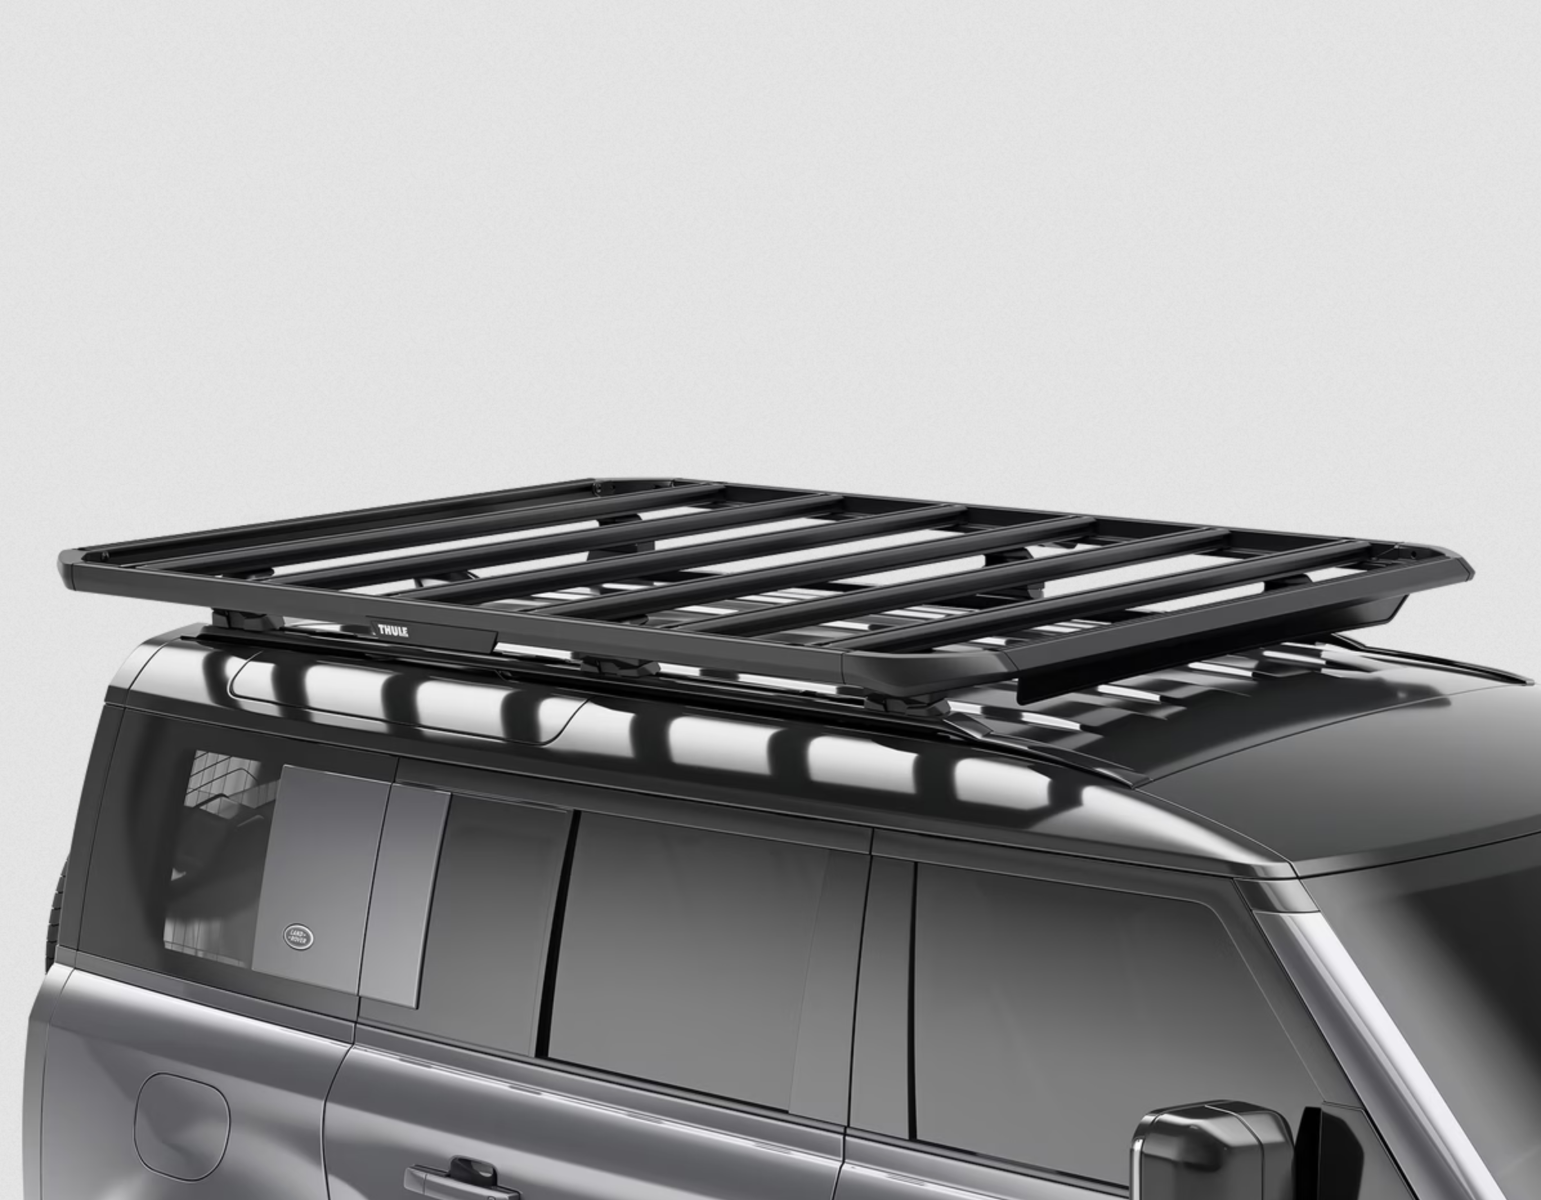 Thule Caprock Platform (1500 x 1330mm) for Honda Accord CP 5dr Wagon with Raised Roof Rail (2008 to 2013) - Raised Rail Mount